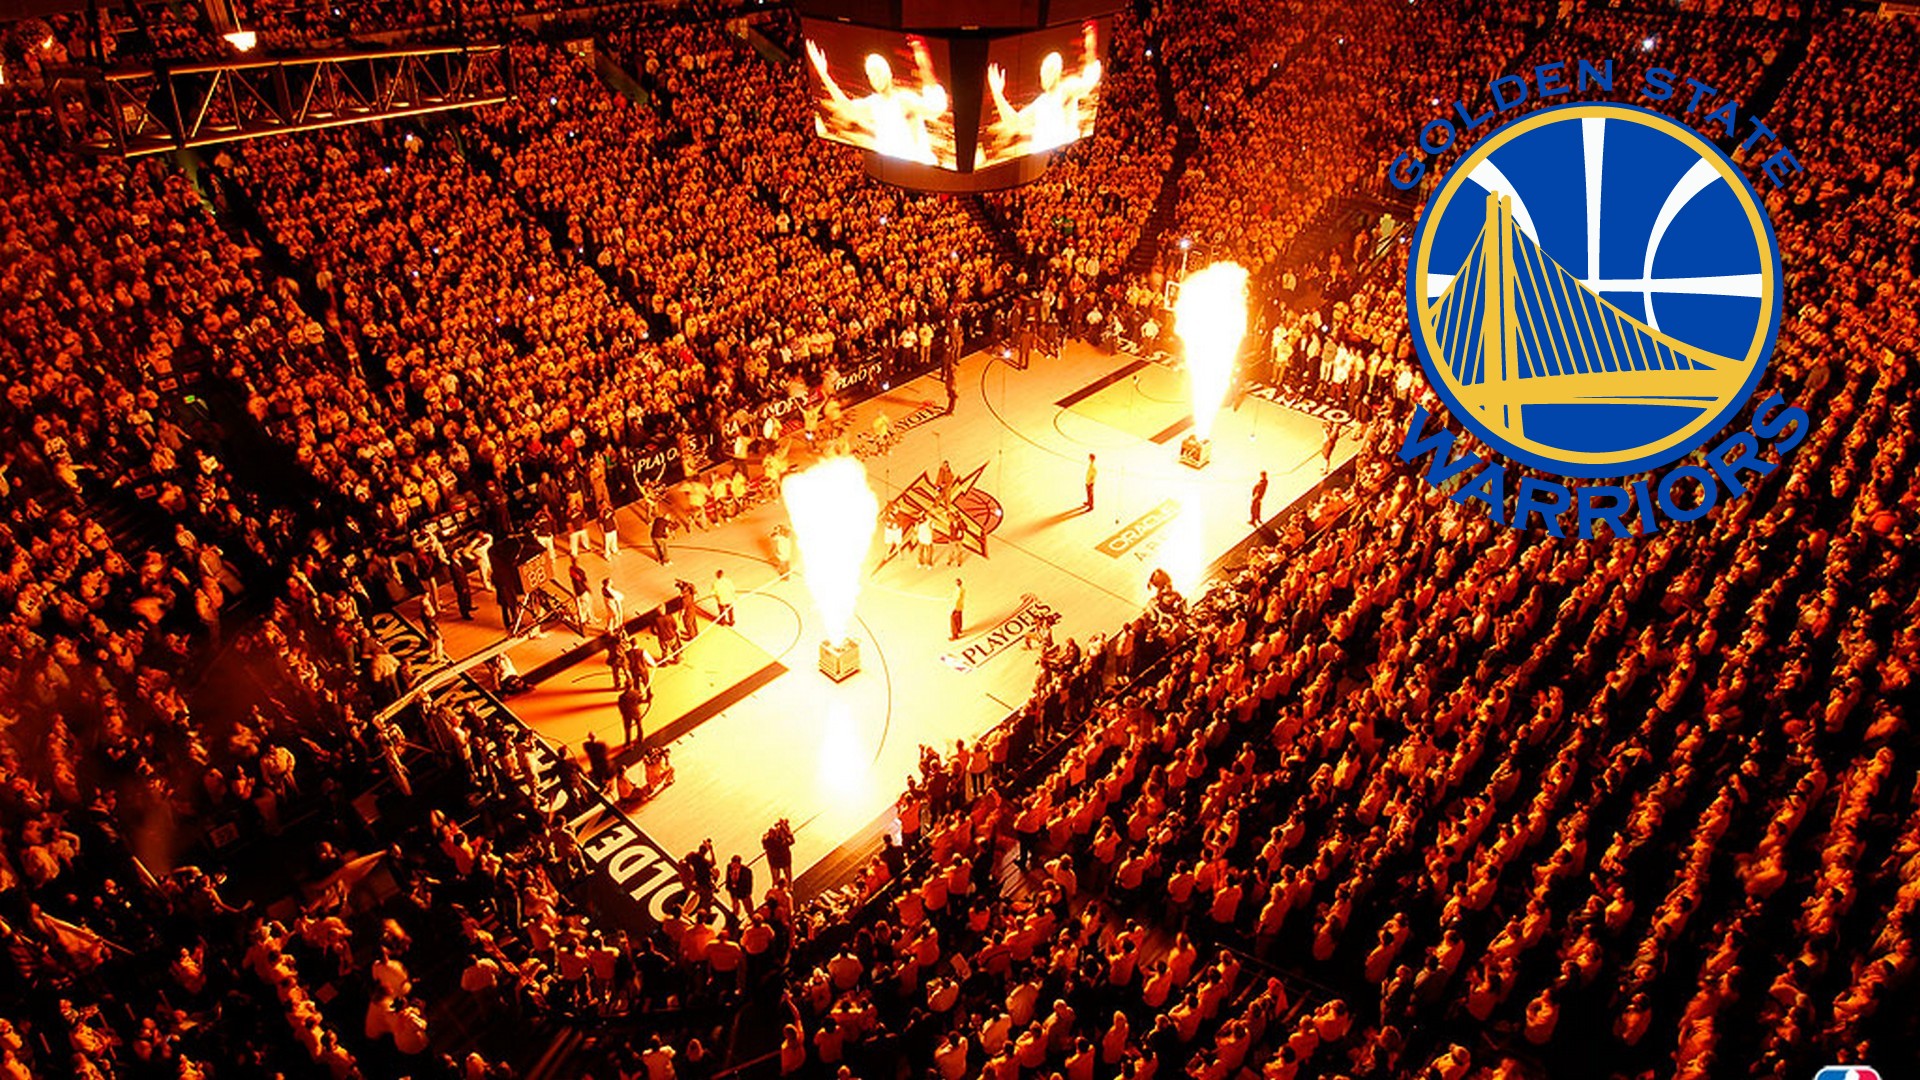 Golden State Warriors NBA Backgrounds HD with image dimensions 1920X1080 pixel. You can make this wallpaper for your Desktop Computer Backgrounds, Windows or Mac Screensavers, iPhone Lock screen, Tablet or Android and another Mobile Phone device